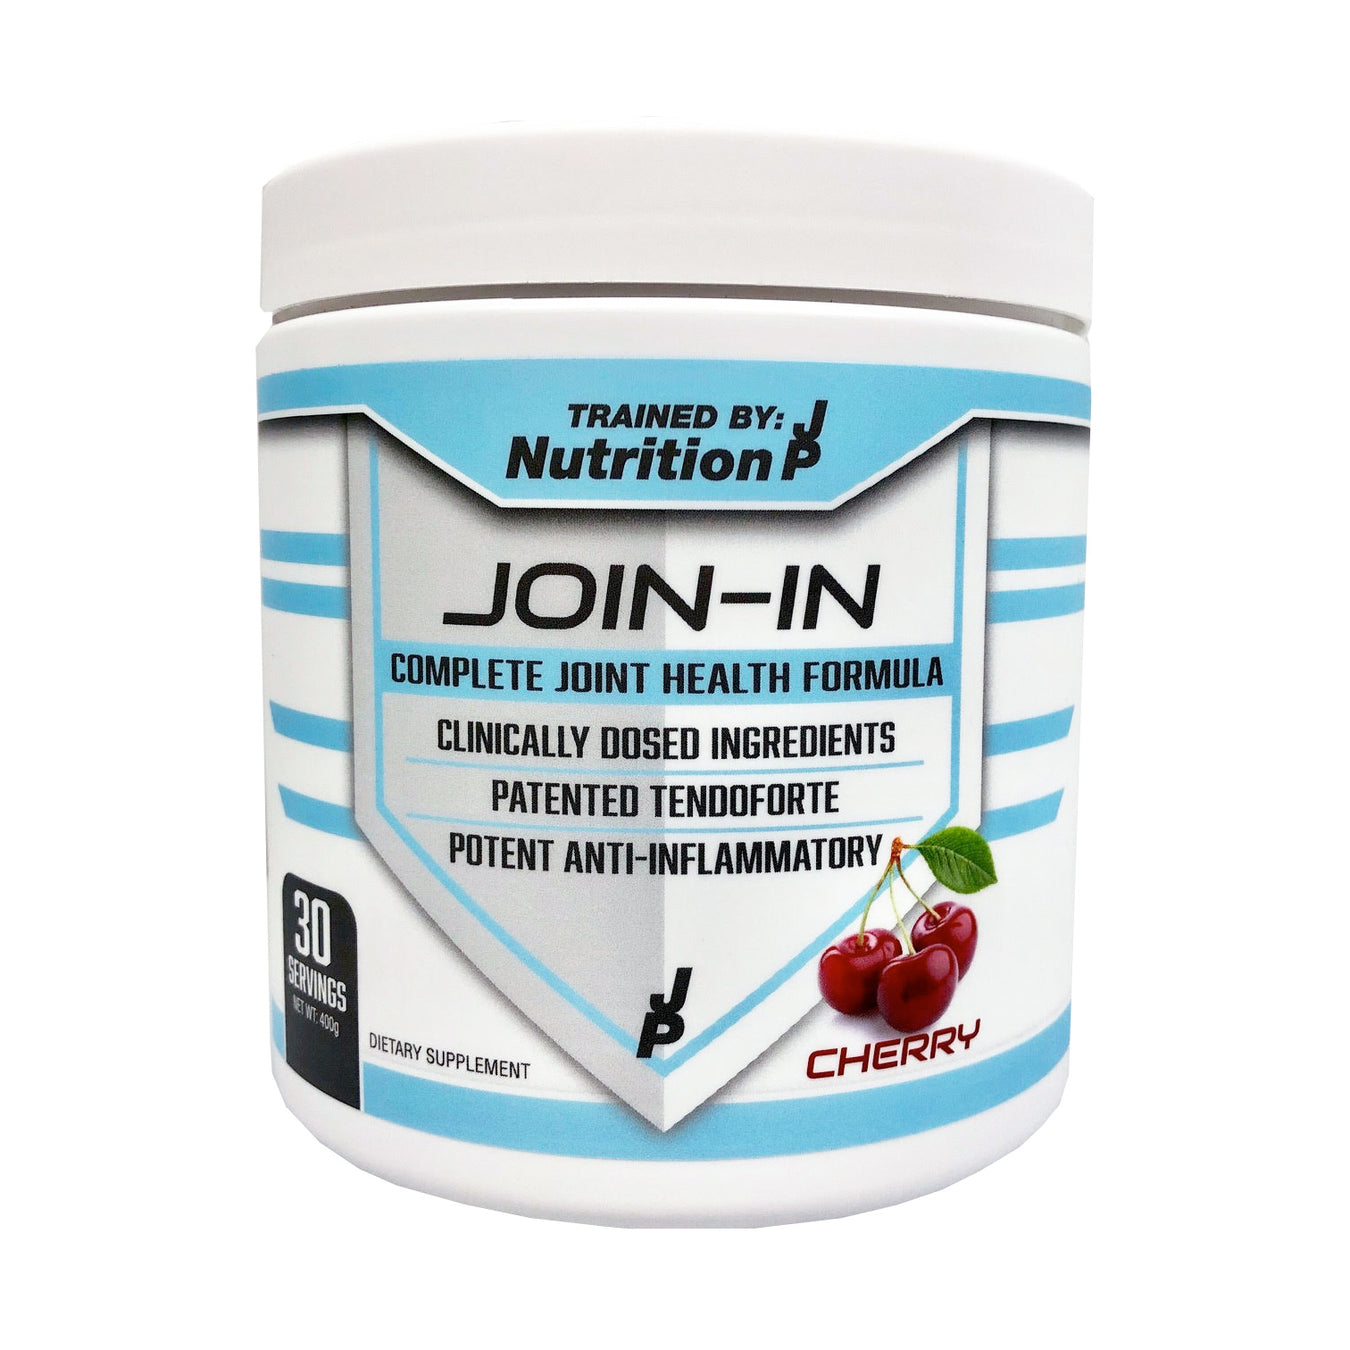 Trained by JP Nutrition